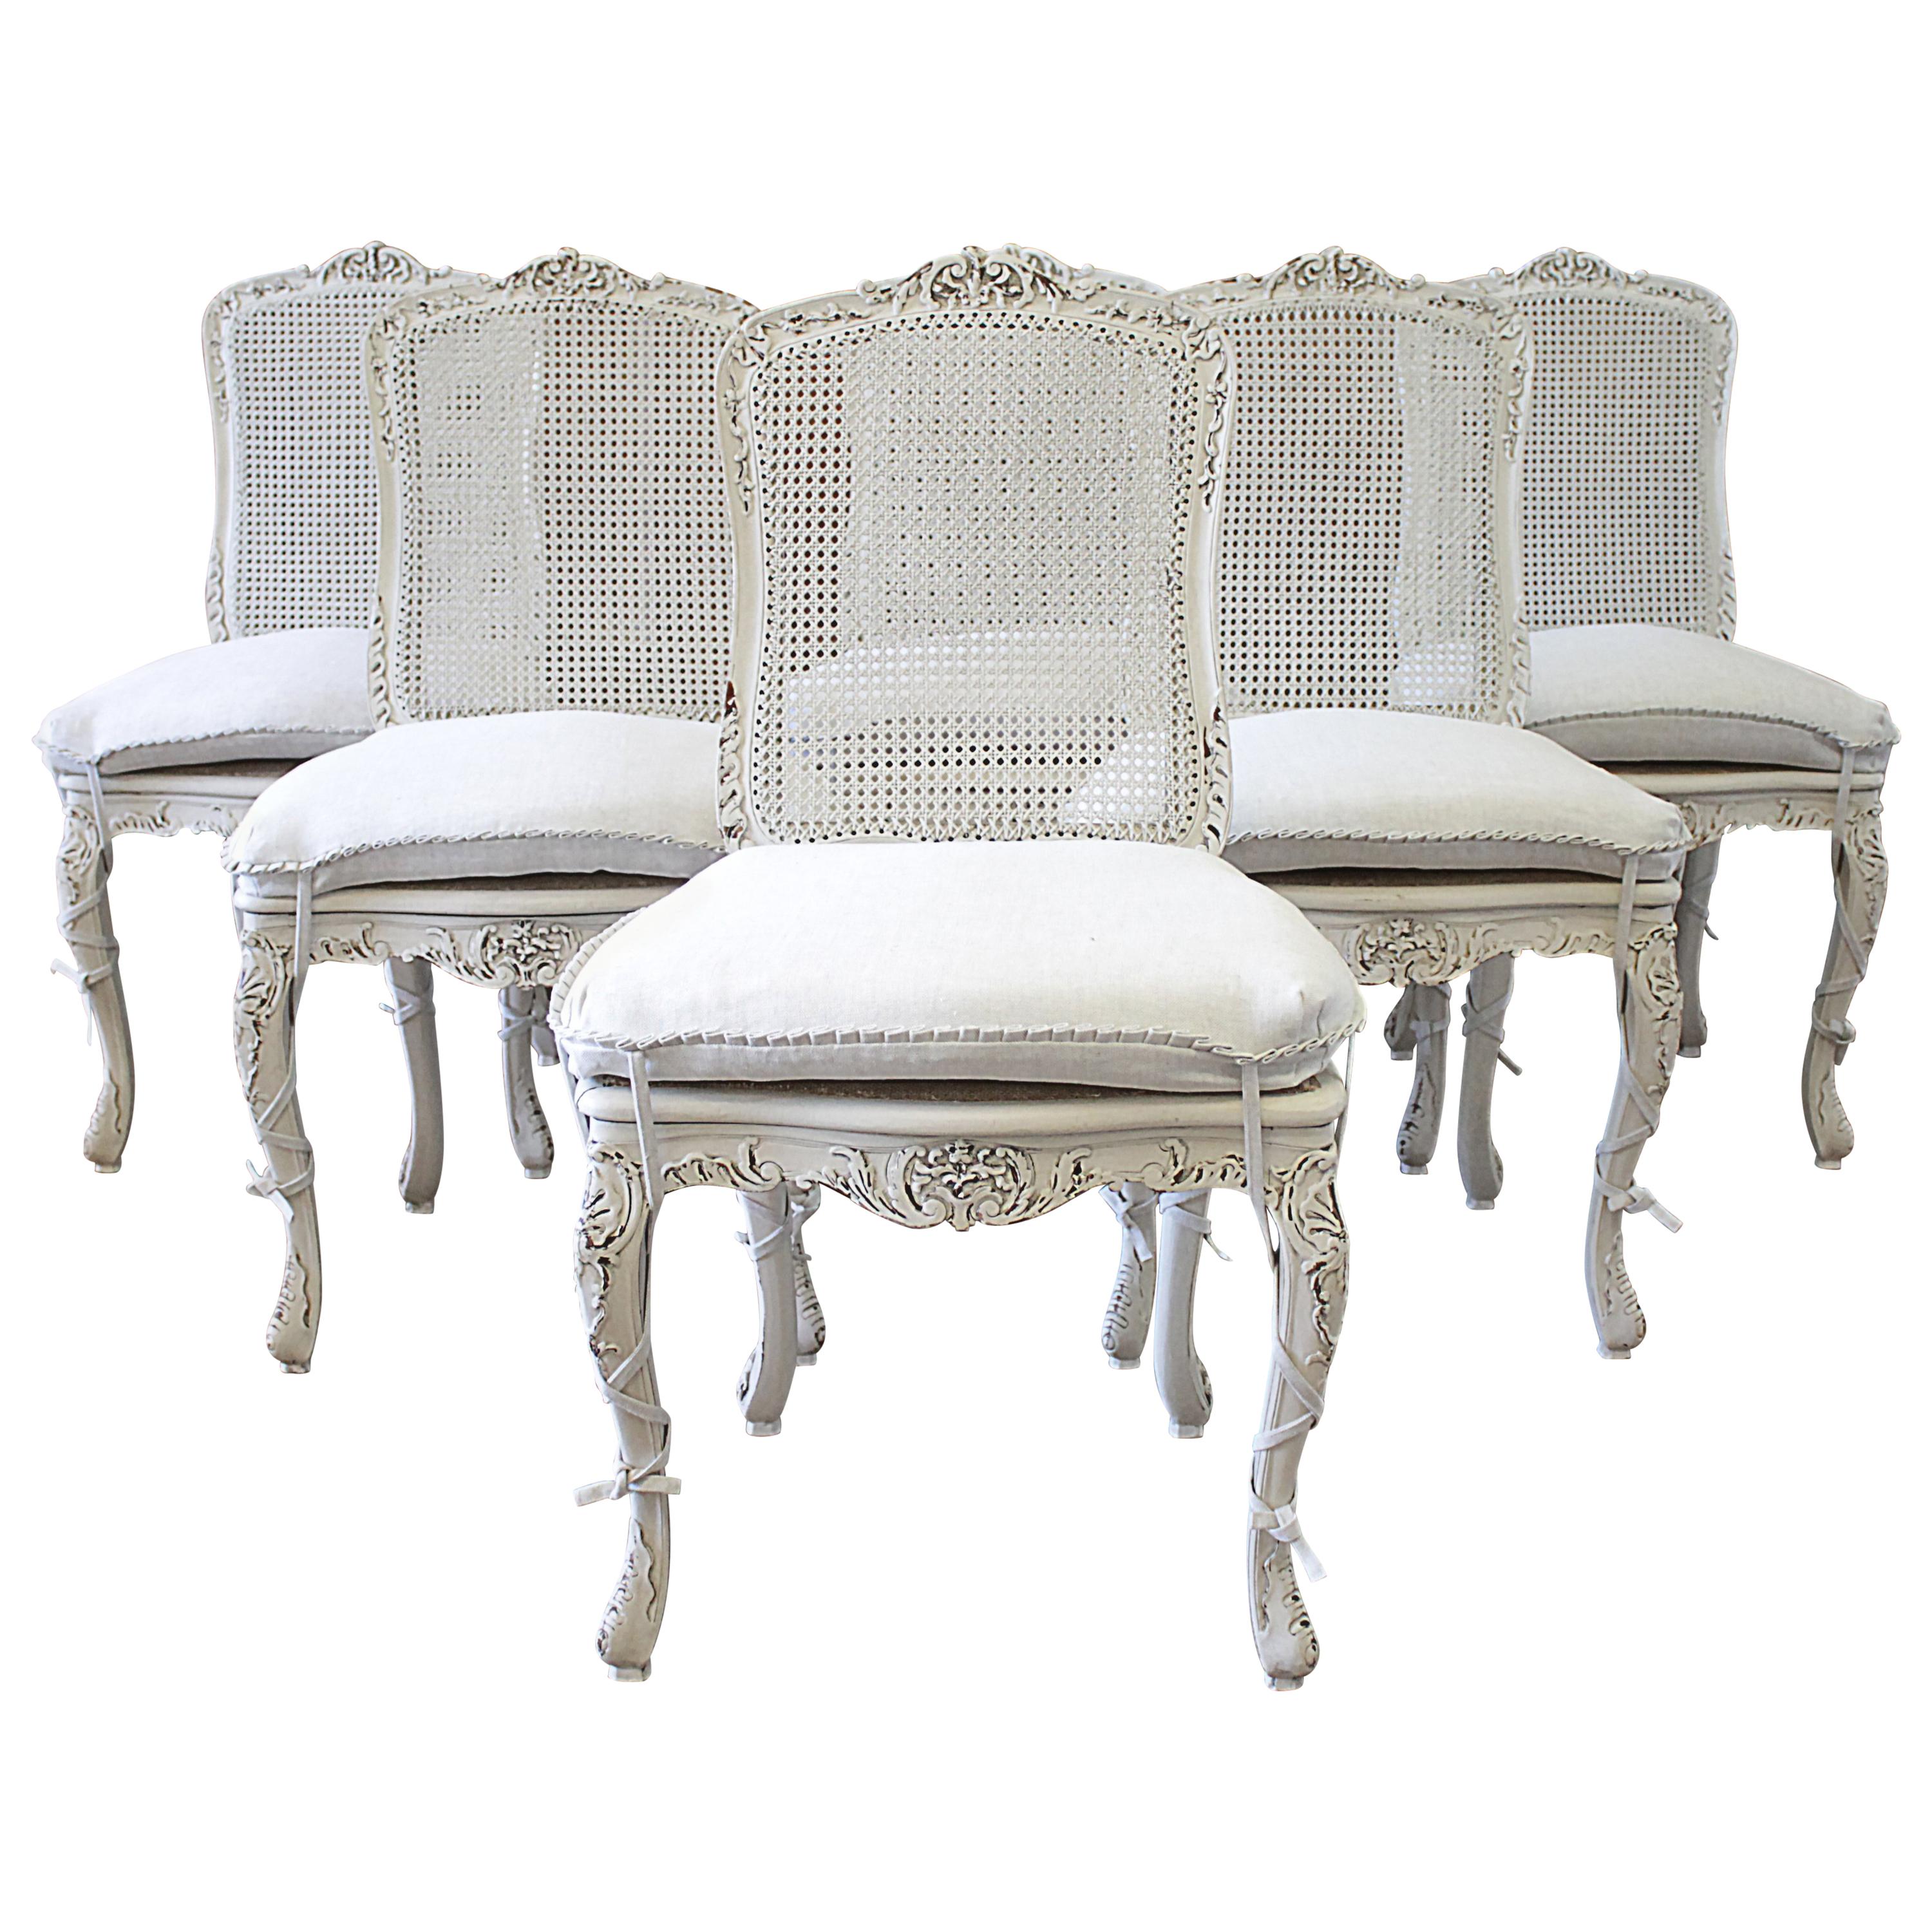 Set of 4 French Country Painted Cane Back Dining Chairs